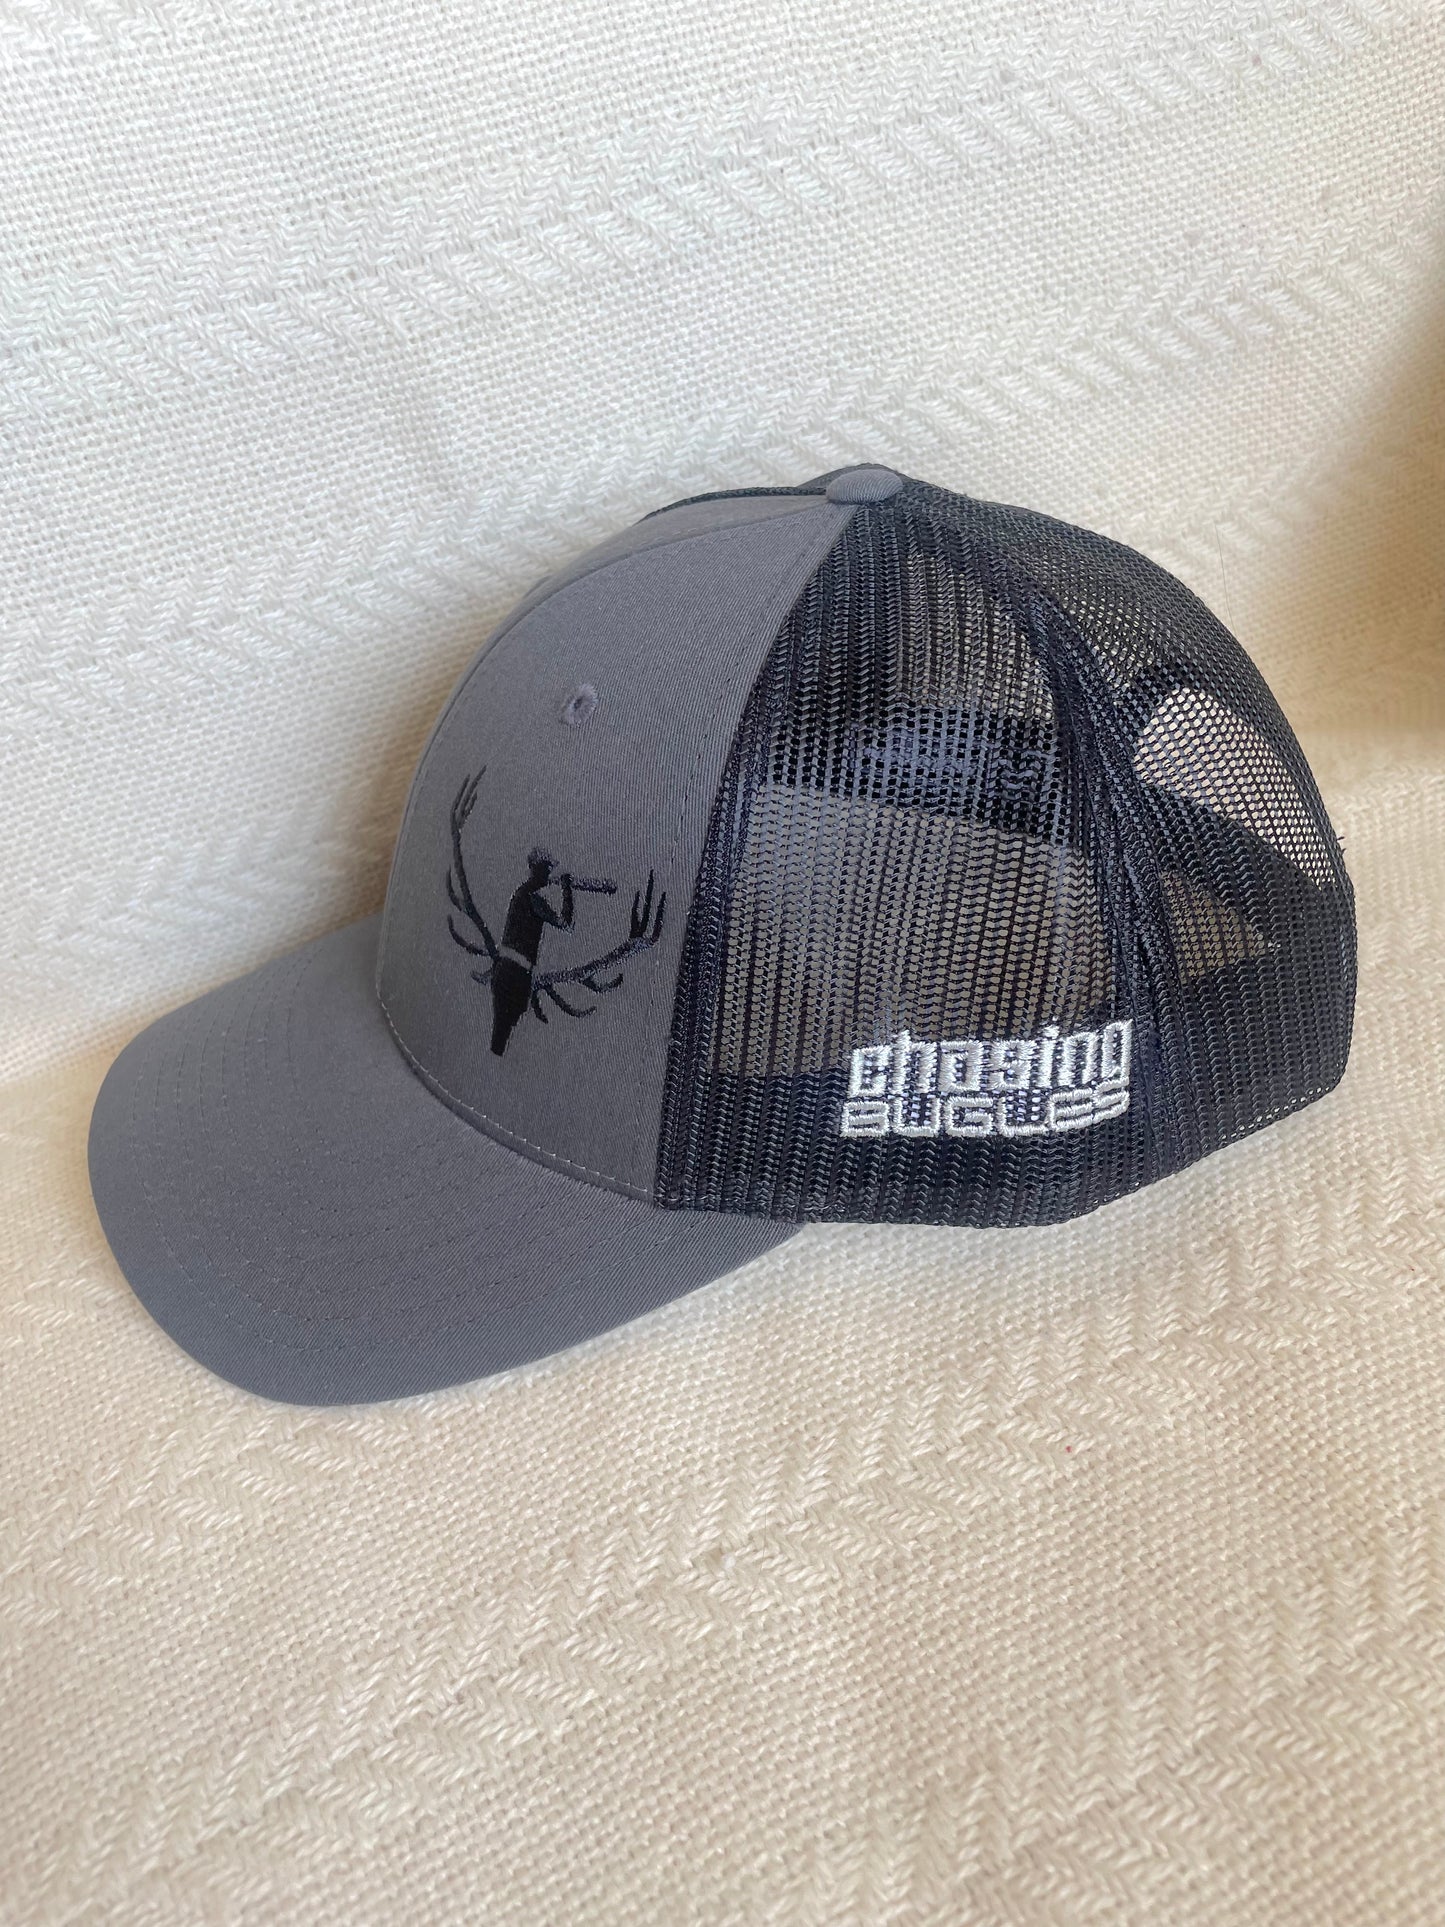 Low Pro Trucker Hat - Charcoal/Black with Side Logo- Med/Large